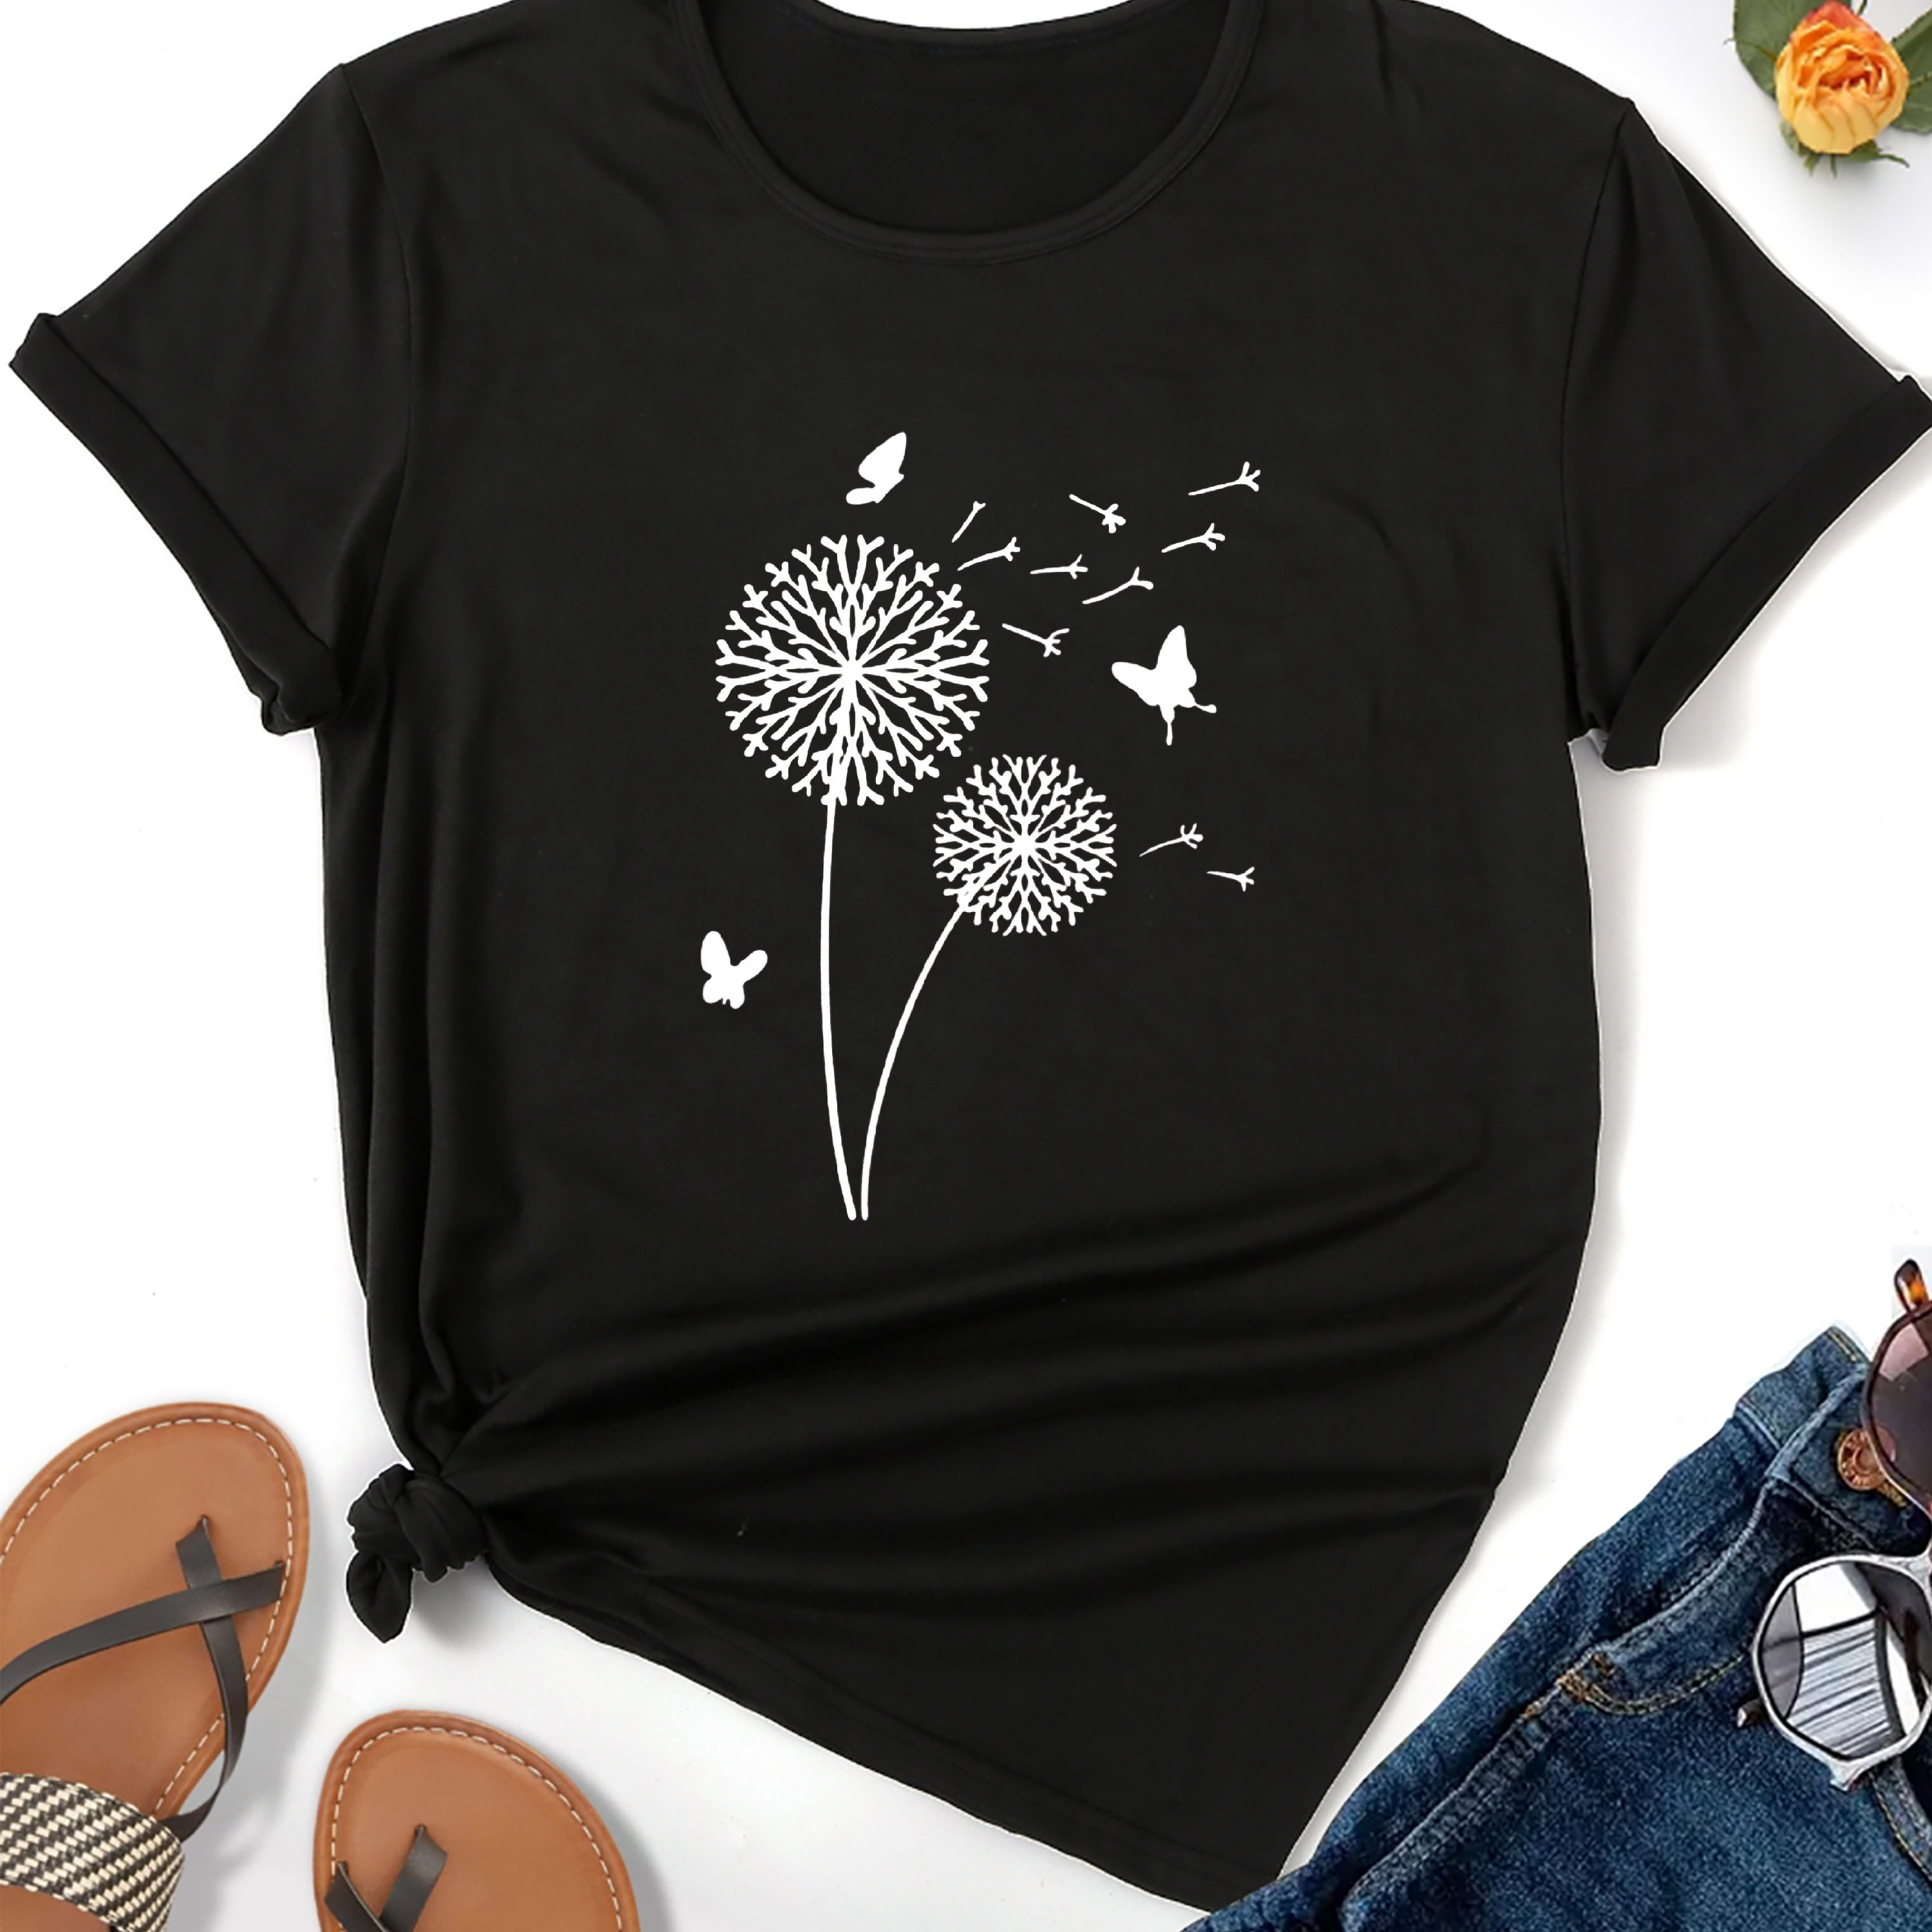 

Dandelion & Butterfly Print T-shirt, Casual Short Sleeve Crew Neck Top For Spring & Summer, Women's Clothing